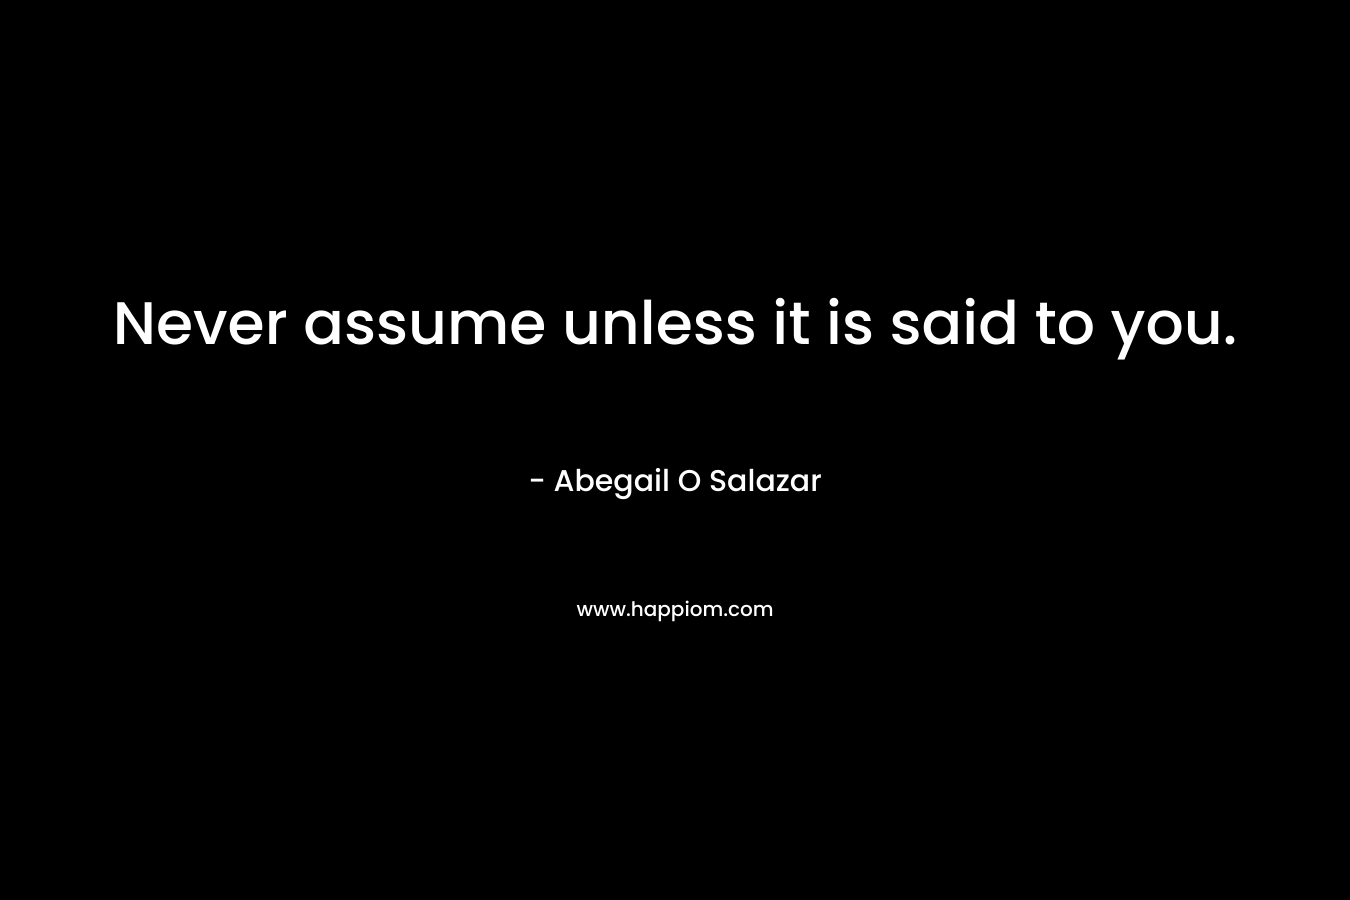 Never assume unless it is said to you. – Abegail O Salazar